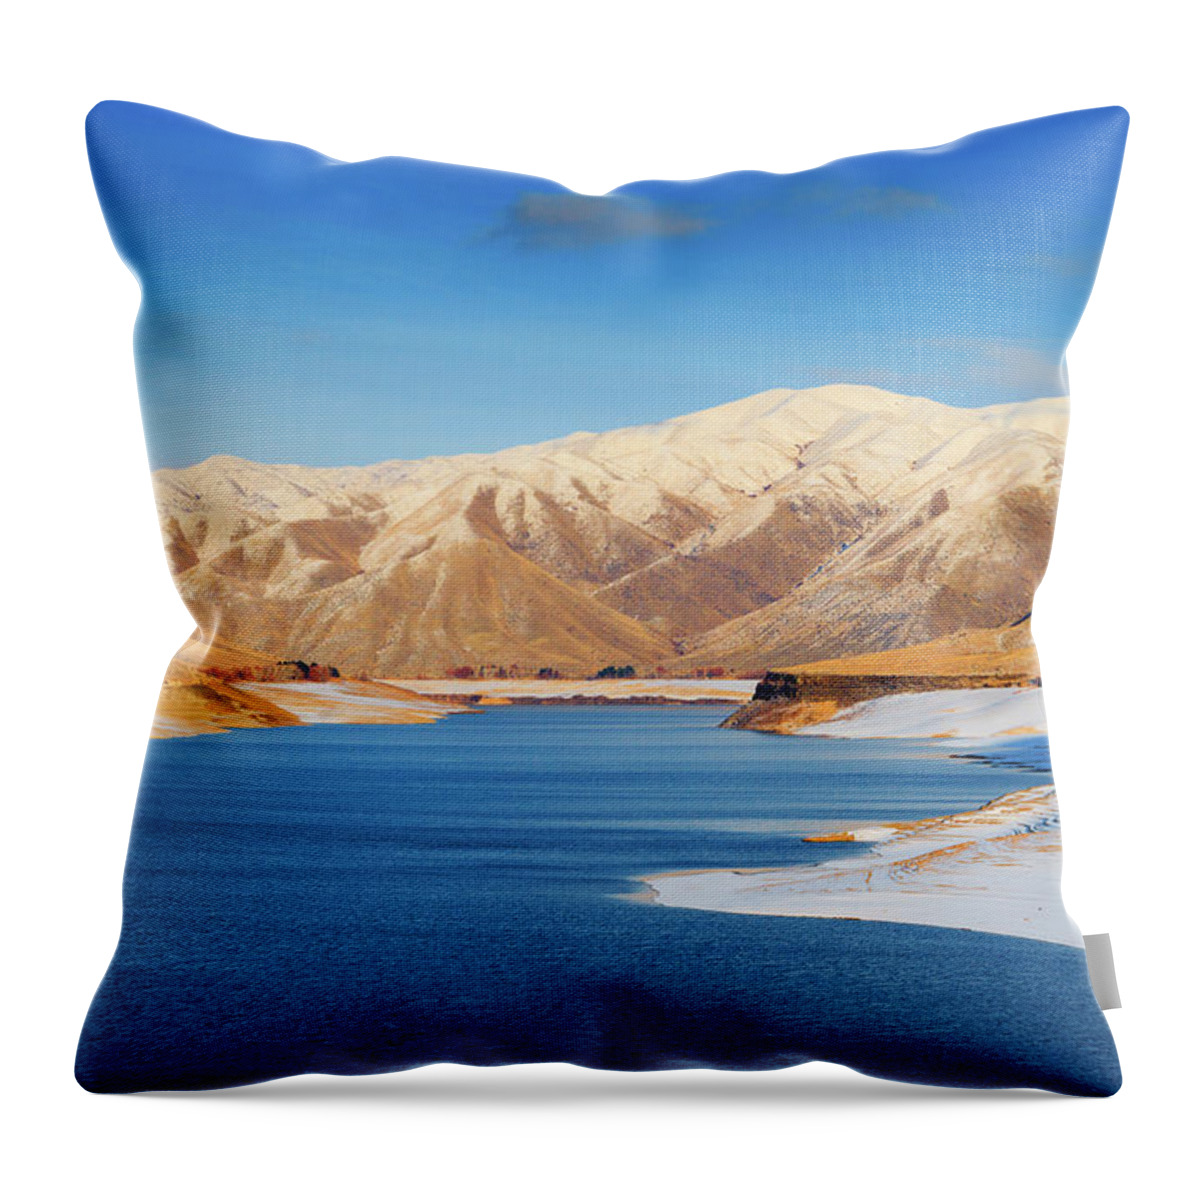 Tranquility Throw Pillow featuring the photograph Lucky Peak Reservoir At Sunset In Winter by Anna Gorin